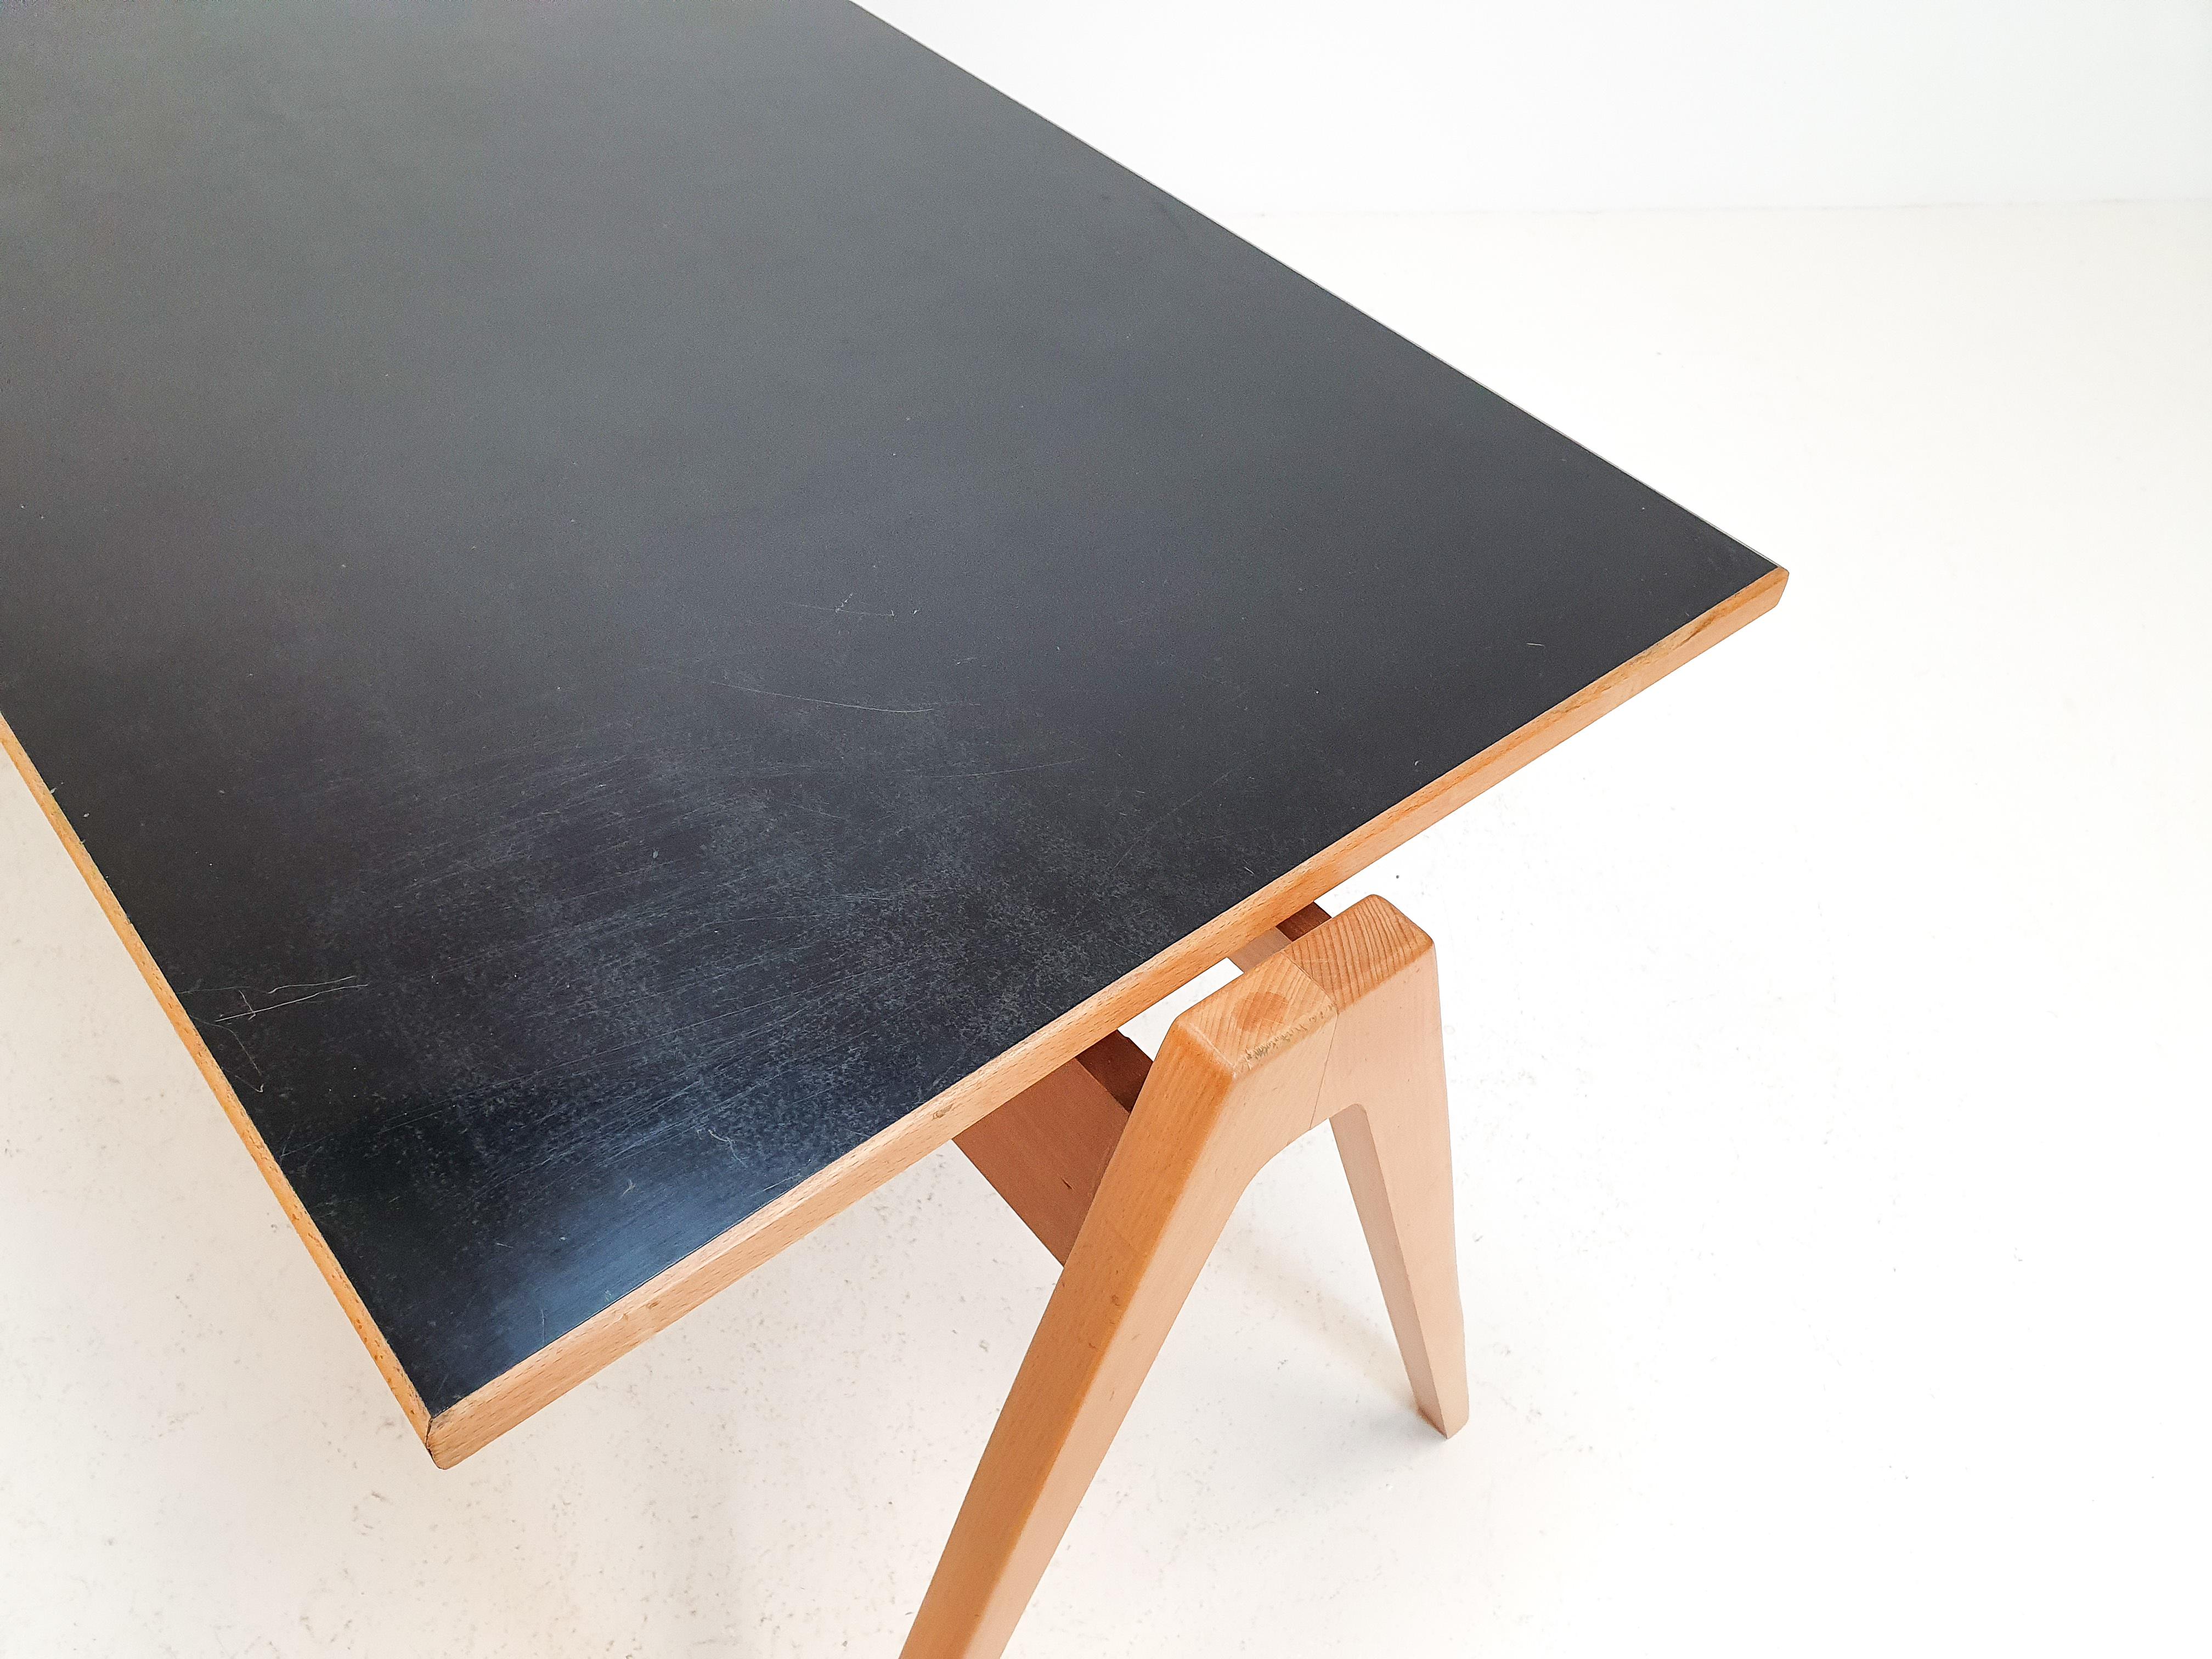 Beech Robin Day Hillestak Table/Desk with Black Warerite Top for Hille, 1950s